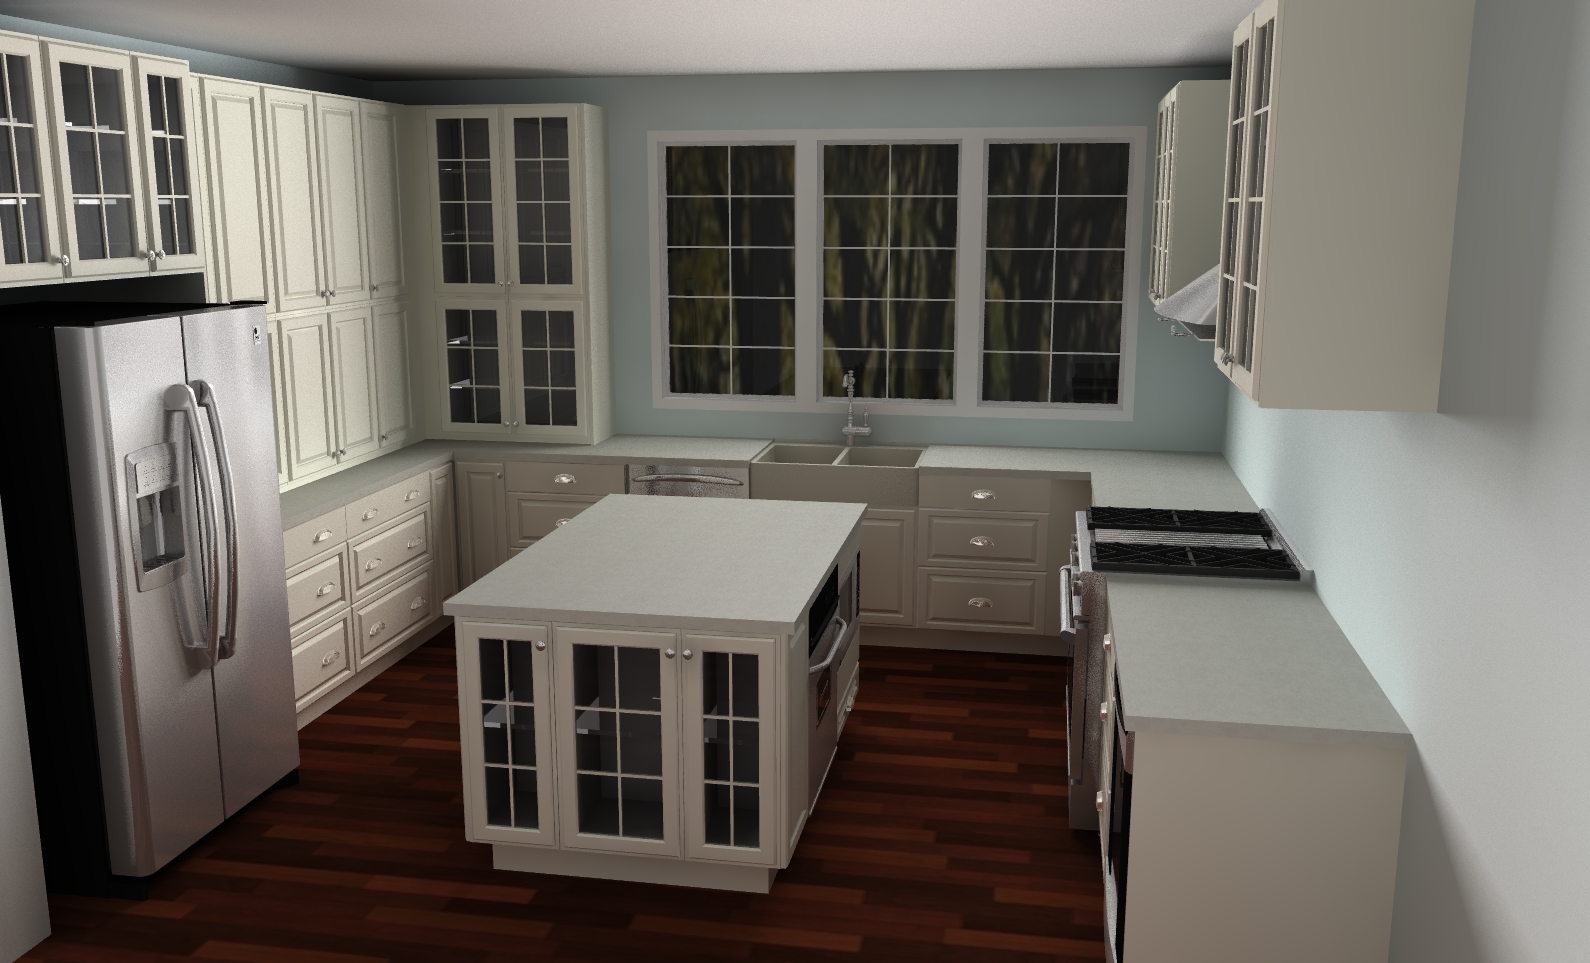 Check Out This Fun And Easy Kitchen Design Tool Visualize Your